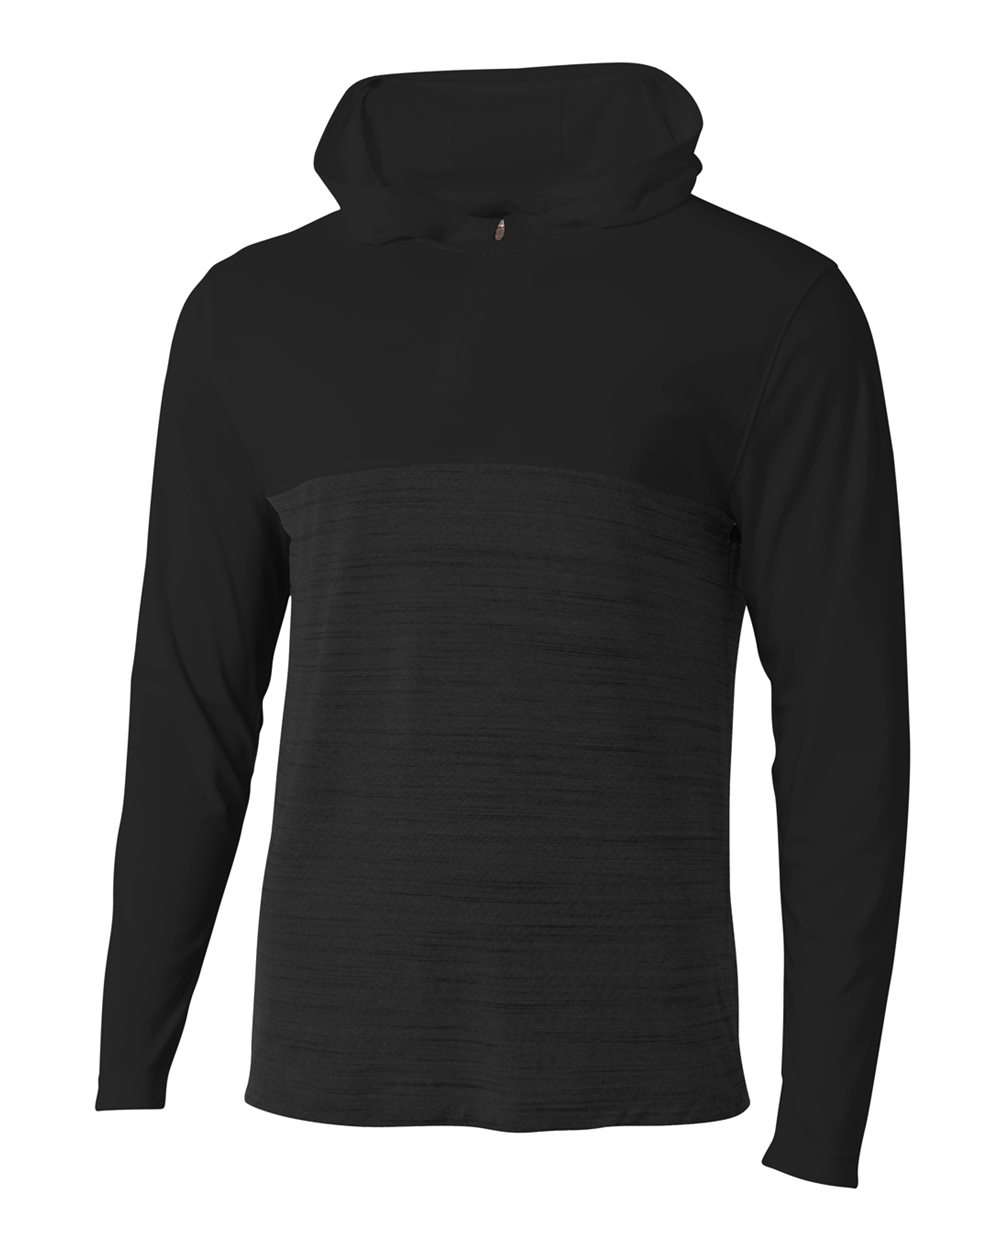 A4 NB4013 Youth Slate Quarter Zip in Best Price